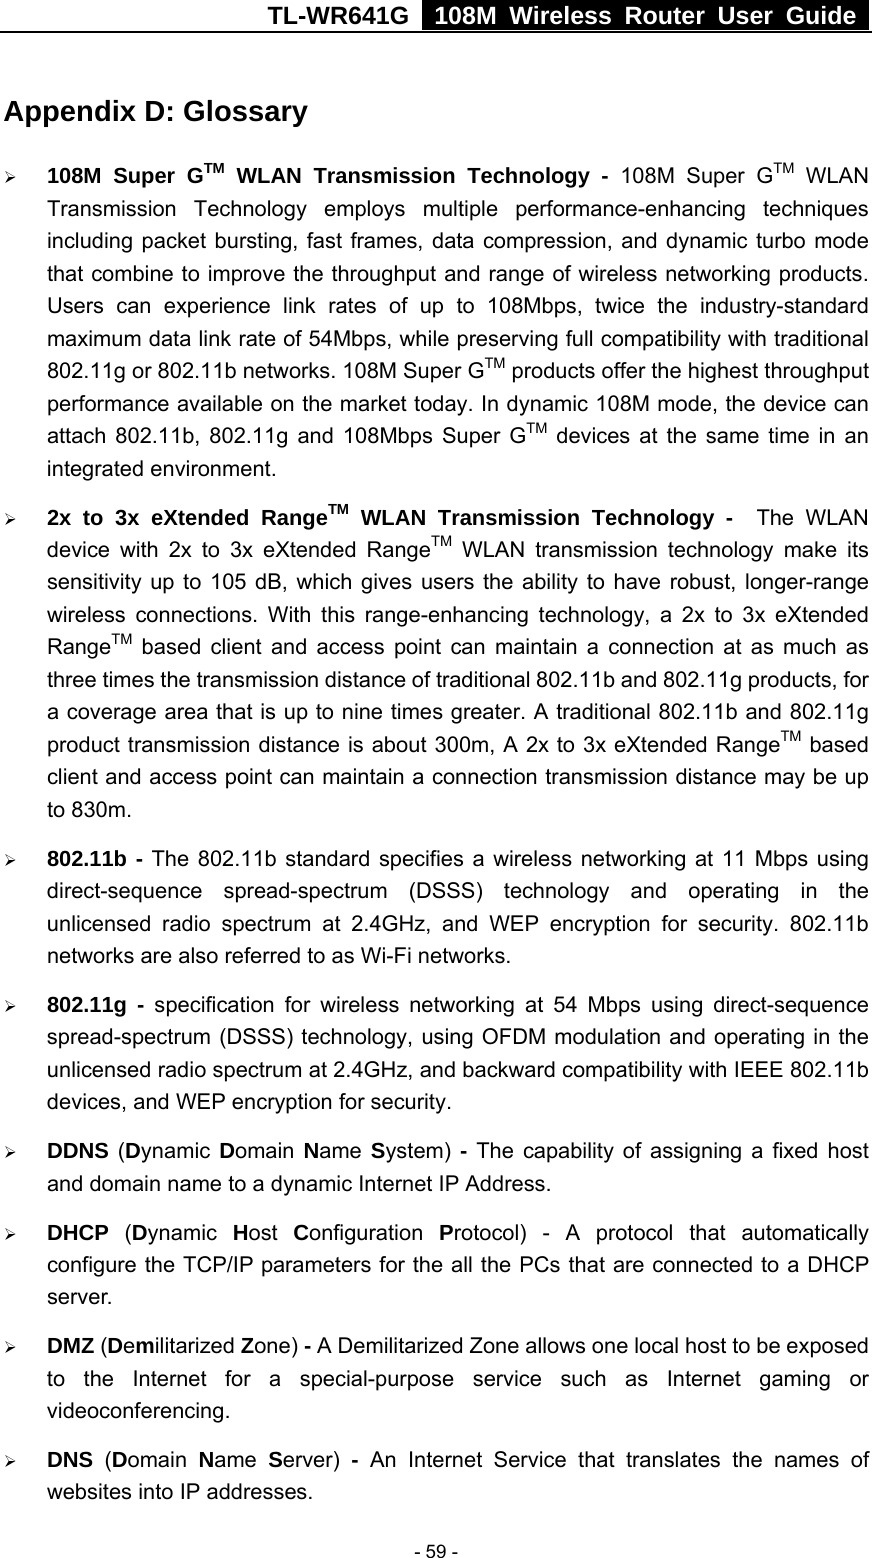 TL-WR641G   108M Wireless Router User Guide   - 59 -Appendix D: Glossary ¾ 108M Super GTM WLAN Transmission Technology - 108M Super GTM WLAN Transmission Technology employs multiple performance-enhancing techniques including packet bursting, fast frames, data compression, and dynamic turbo mode that combine to improve the throughput and range of wireless networking products. Users can experience link rates of up to 108Mbps, twice the industry-standard maximum data link rate of 54Mbps, while preserving full compatibility with traditional 802.11g or 802.11b networks. 108M Super GTM products offer the highest throughput performance available on the market today. In dynamic 108M mode, the device can attach 802.11b, 802.11g and 108Mbps Super GTM devices at the same time in an integrated environment. ¾ 2x to 3x eXtended RangeTM WLAN Transmission Technology -  The WLAN device with 2x to 3x eXtended RangeTM WLAN transmission technology make its sensitivity up to 105 dB, which gives users the ability to have robust, longer-range wireless connections. With this range-enhancing technology, a 2x to 3x eXtended RangeTM based client and access point can maintain a connection at as much as three times the transmission distance of traditional 802.11b and 802.11g products, for a coverage area that is up to nine times greater. A traditional 802.11b and 802.11g product transmission distance is about 300m, A 2x to 3x eXtended RangeTM based client and access point can maintain a connection transmission distance may be up to 830m. ¾ 802.11b - The 802.11b standard specifies a wireless networking at 11 Mbps using direct-sequence spread-spectrum (DSSS) technology and operating in the unlicensed radio spectrum at 2.4GHz, and WEP encryption for security. 802.11b networks are also referred to as Wi-Fi networks. ¾ 802.11g - specification for wireless networking at 54 Mbps using direct-sequence spread-spectrum (DSSS) technology, using OFDM modulation and operating in the unlicensed radio spectrum at 2.4GHz, and backward compatibility with IEEE 802.11b devices, and WEP encryption for security. ¾ DDNS (Dynamic  Domain  Name  System) - The capability of assigning a fixed host and domain name to a dynamic Internet IP Address.   ¾ DHCP  (Dynamic  Host  Configuration  Protocol) - A protocol that automatically configure the TCP/IP parameters for the all the PCs that are connected to a DHCP server. ¾ DMZ (Demilitarized Zone) - A Demilitarized Zone allows one local host to be exposed to the Internet for a special-purpose service such as Internet gaming or videoconferencing. ¾ DNS  (Domain  Name  Server)  - An Internet Service that translates the names of websites into IP addresses. 